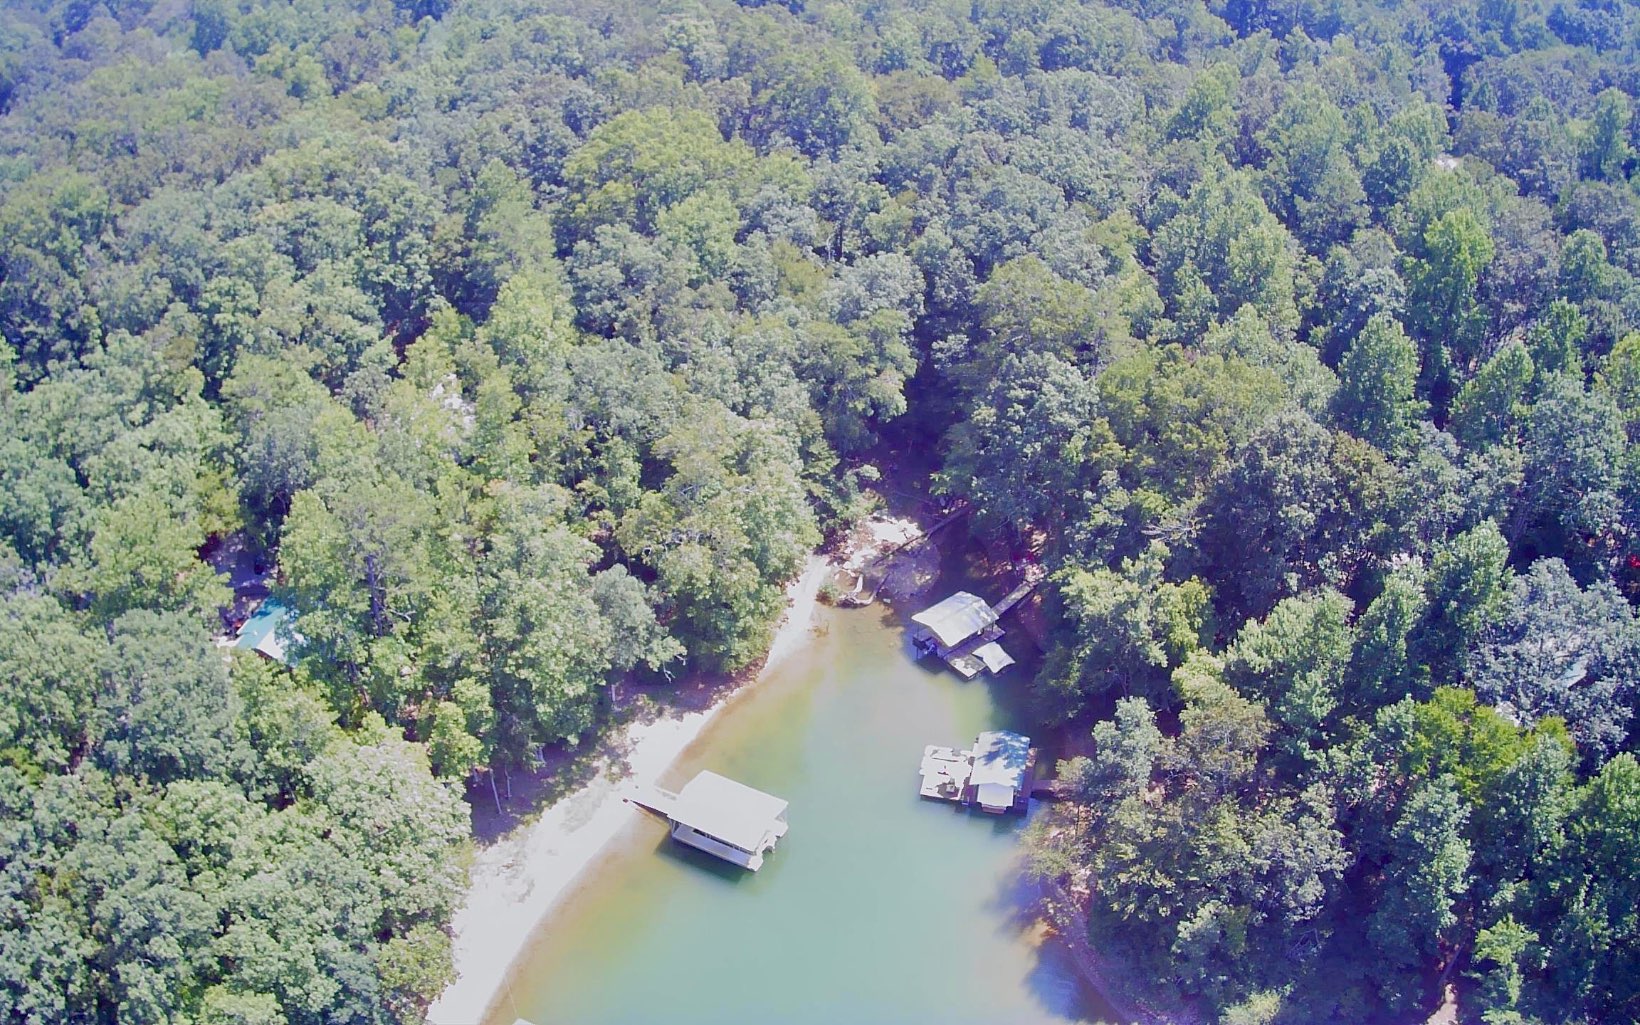 LAKE and CREEK front LOT in the mountains! Build your dream home here on this lot in Blairsville. Lake Nottely is waiting for you. Call today, don't delay!